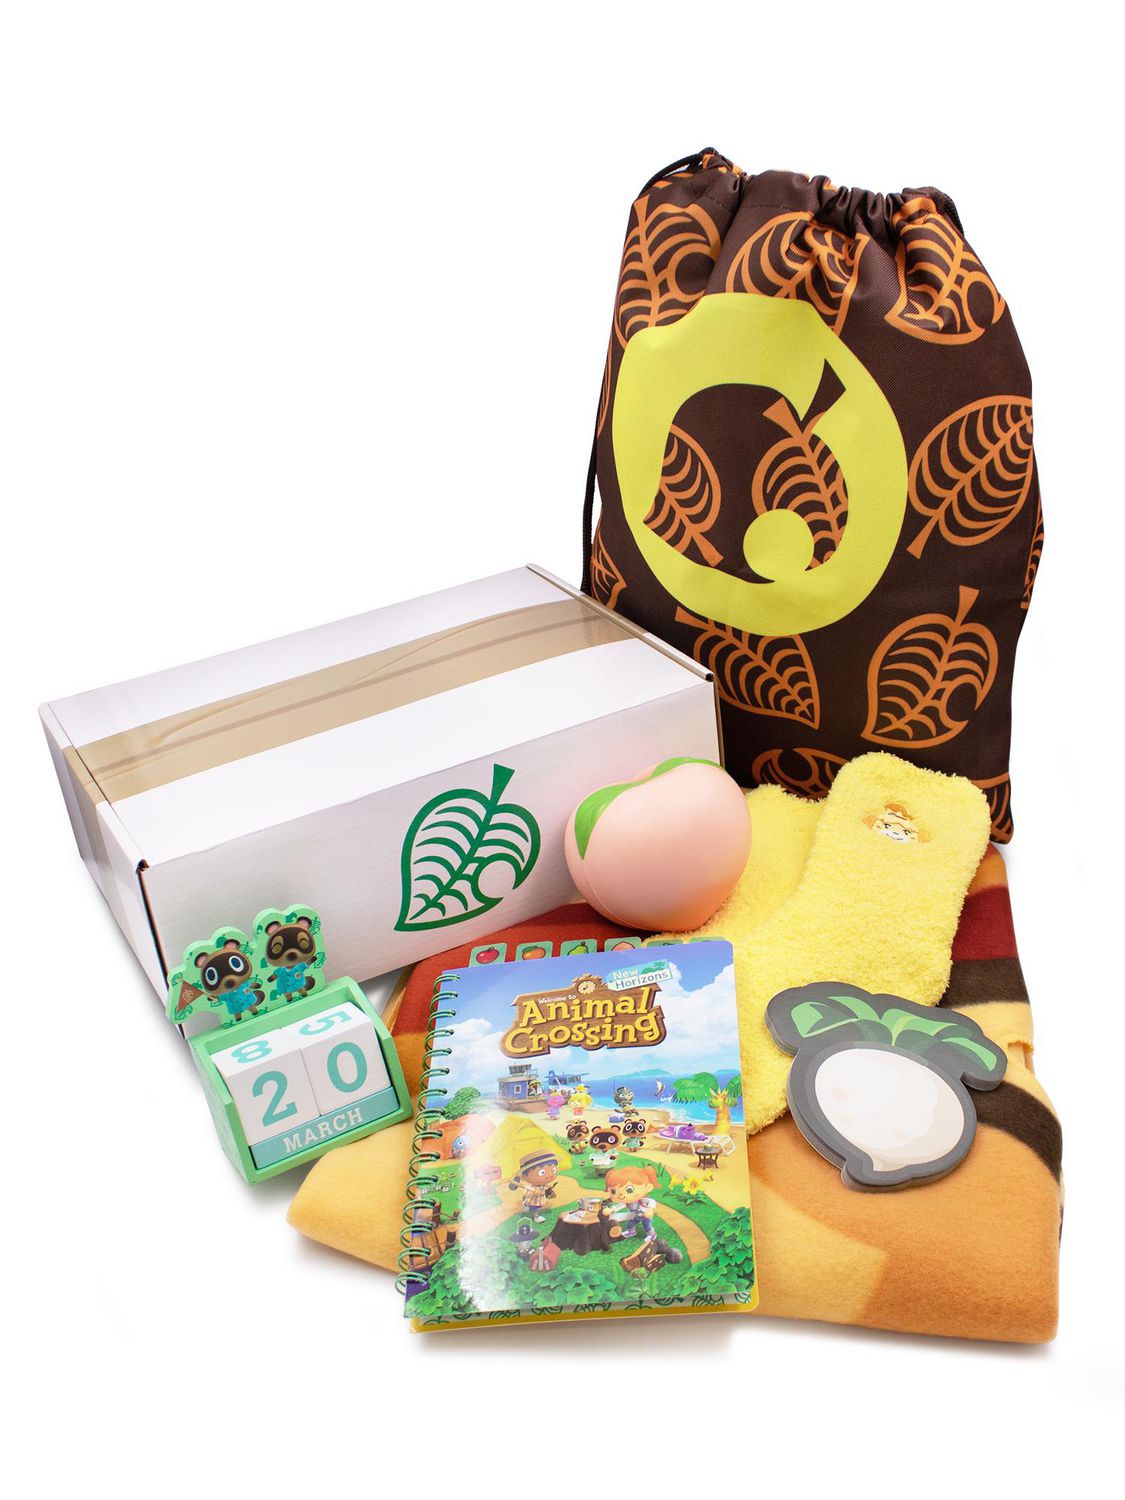 Animal Crossing Collector's Box